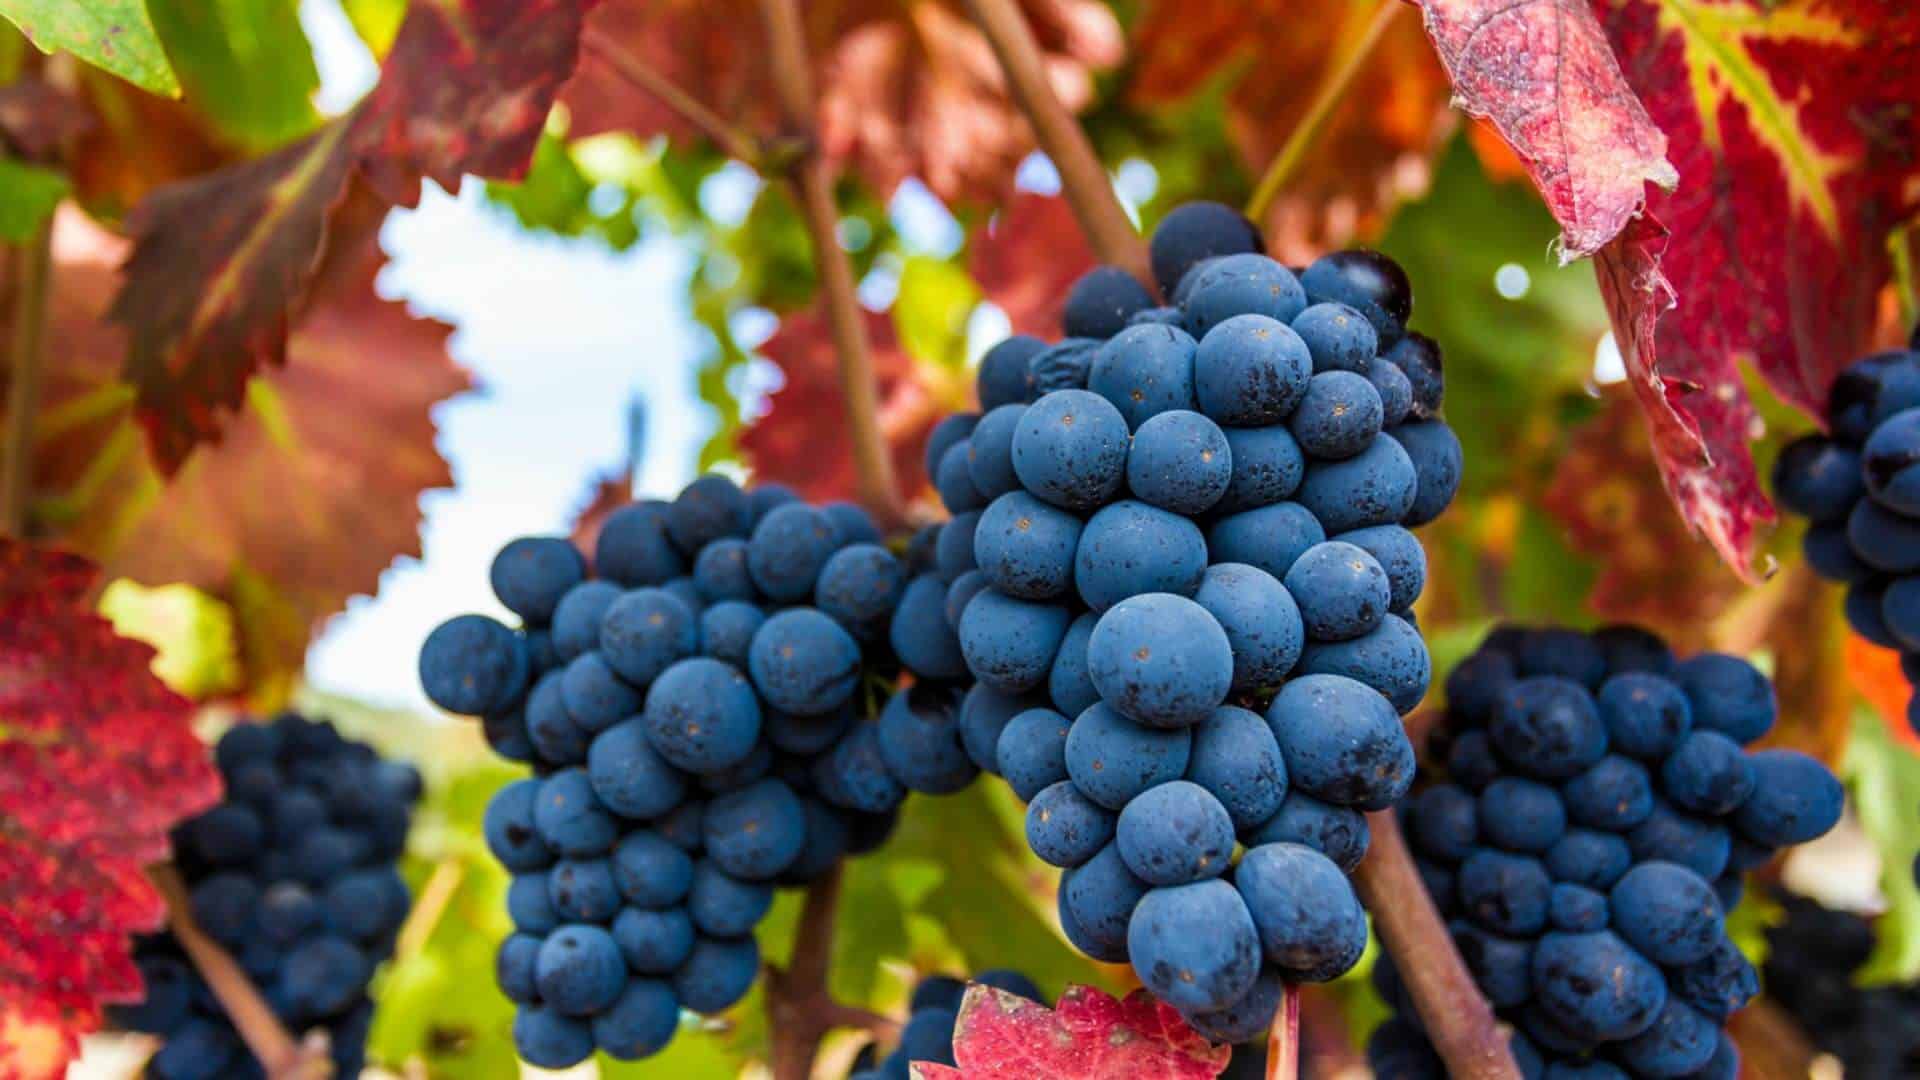 Close up view of purple grapes on a vine surrounded by green and orange leaves